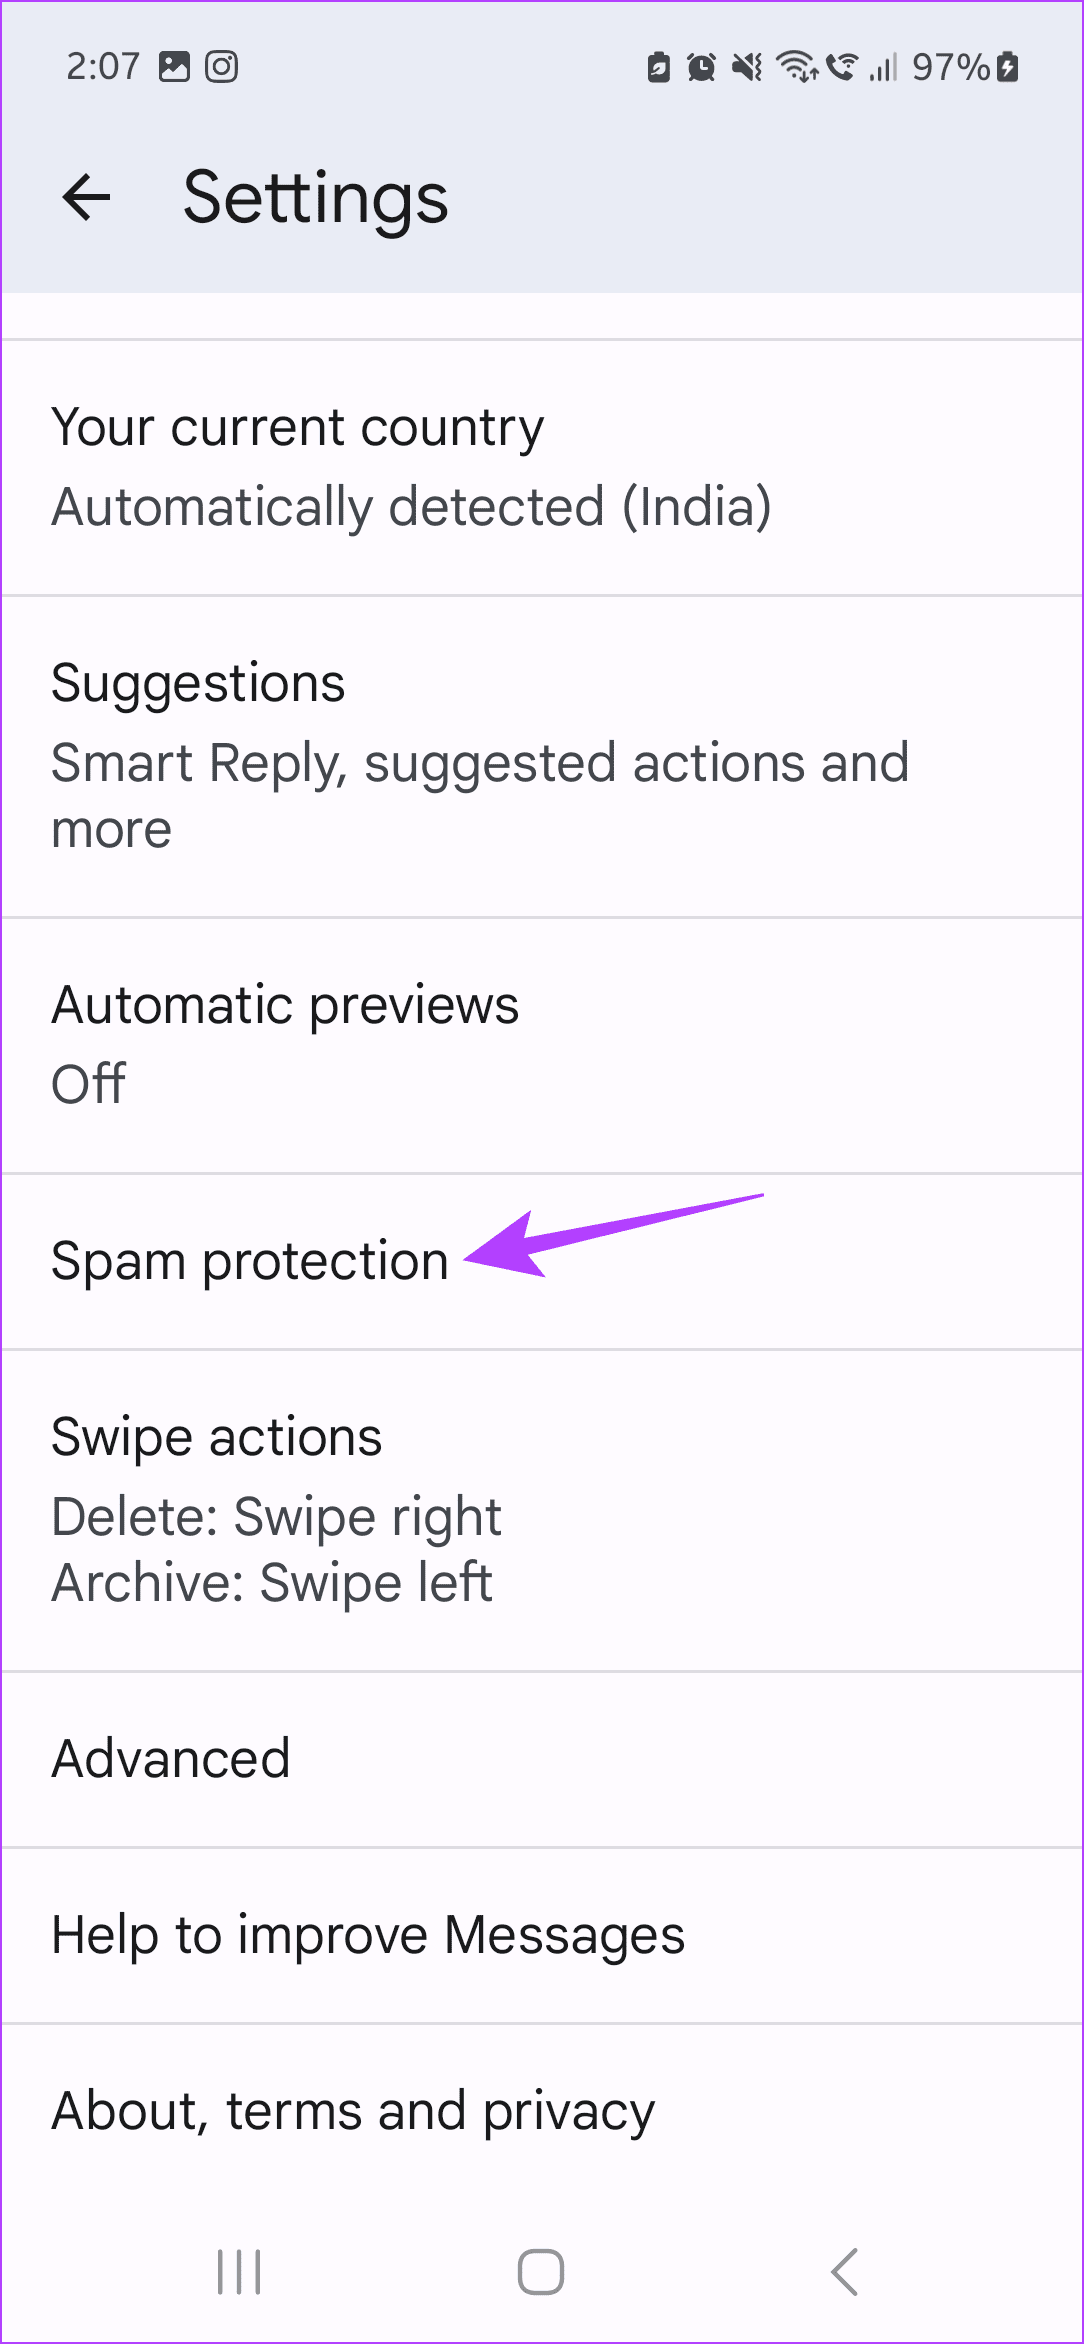 Tap on Spam protection